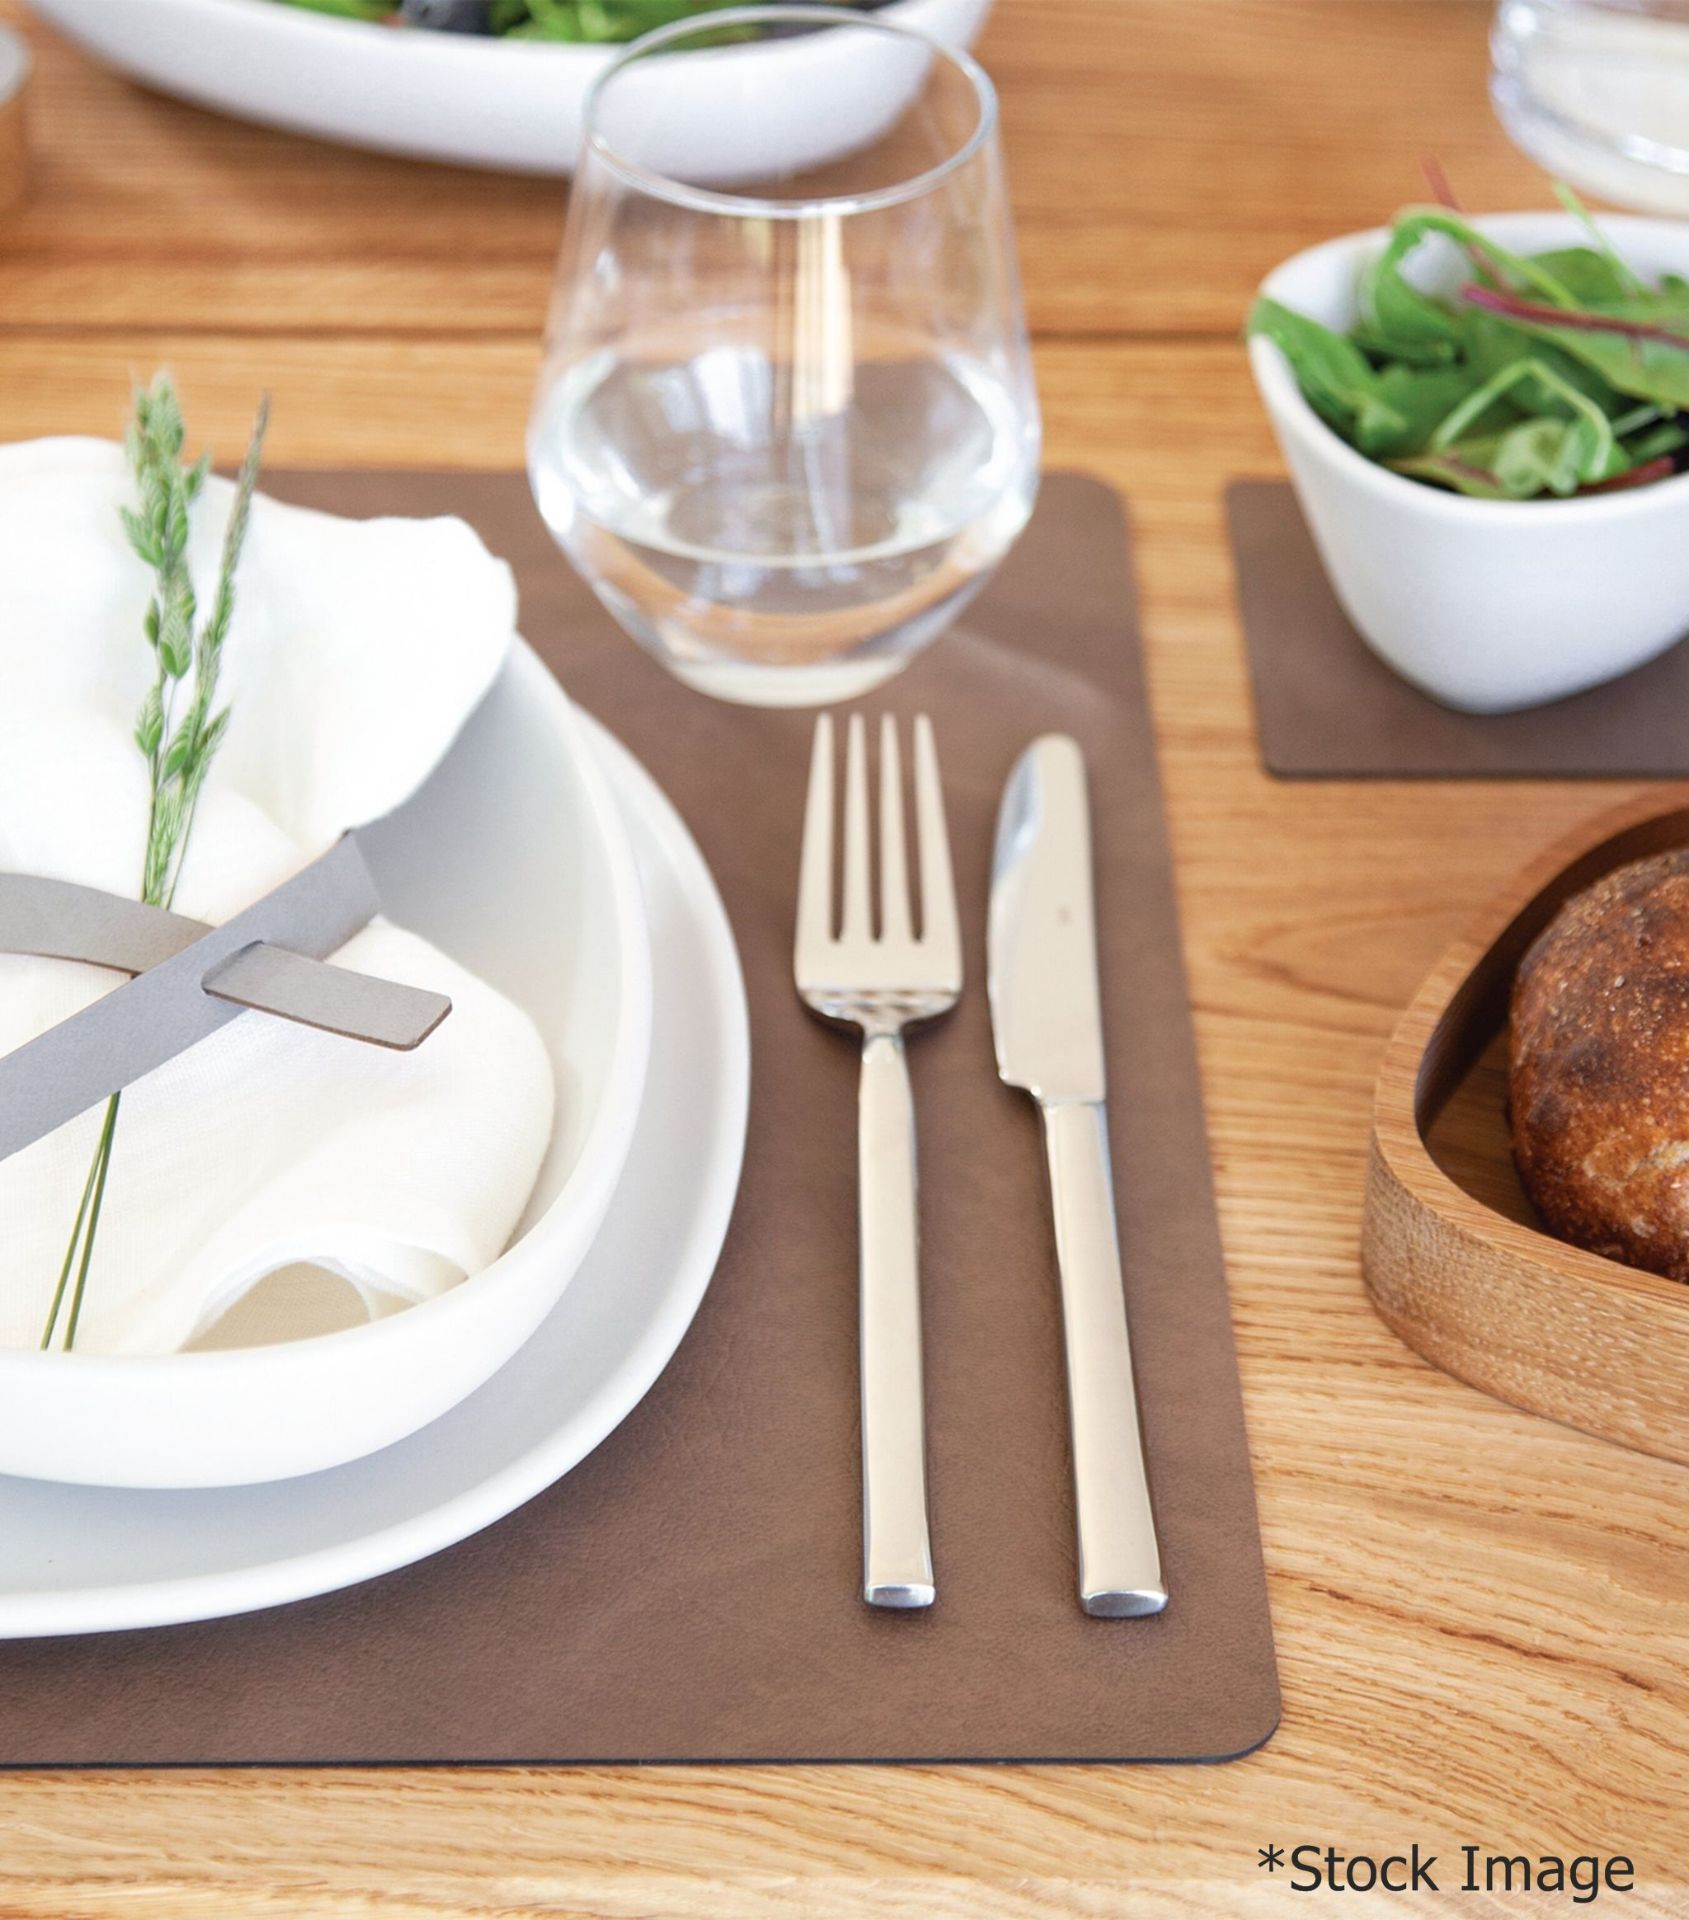 Set Of 4 x LINDDNA 'CLOUD' Recycled Leather Double-sided Placemats In Black & Brown - RRP £109.00 - Image 4 of 9